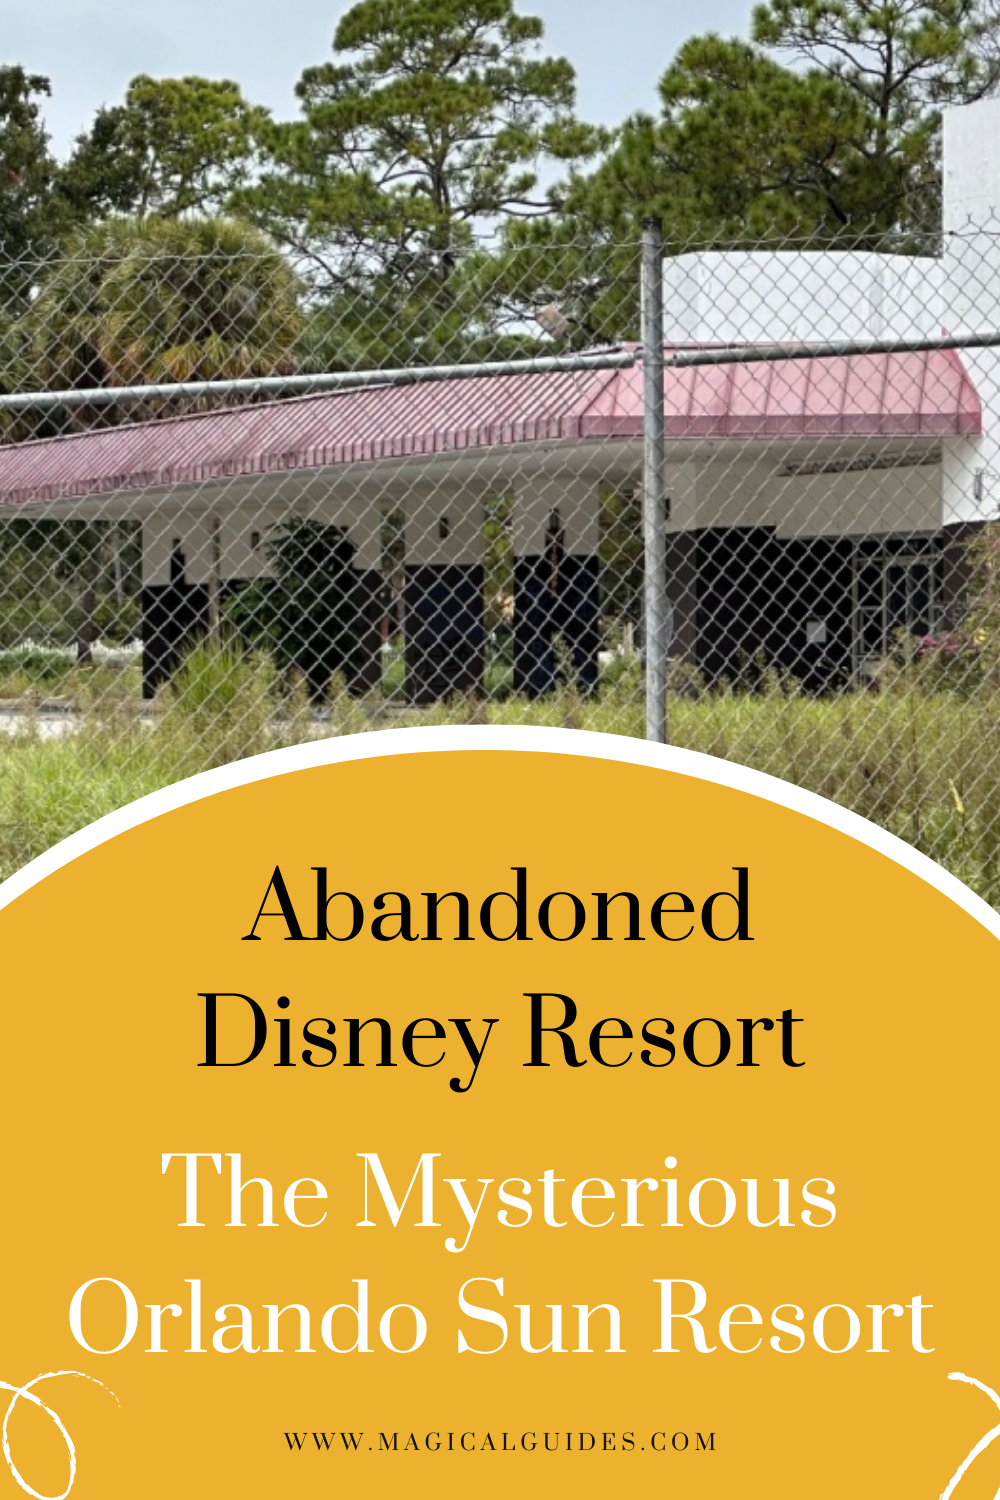 This abandoned resort was incredibly creepy, find out the history of the Mysterious Orlando Sun Resort near Disney World.